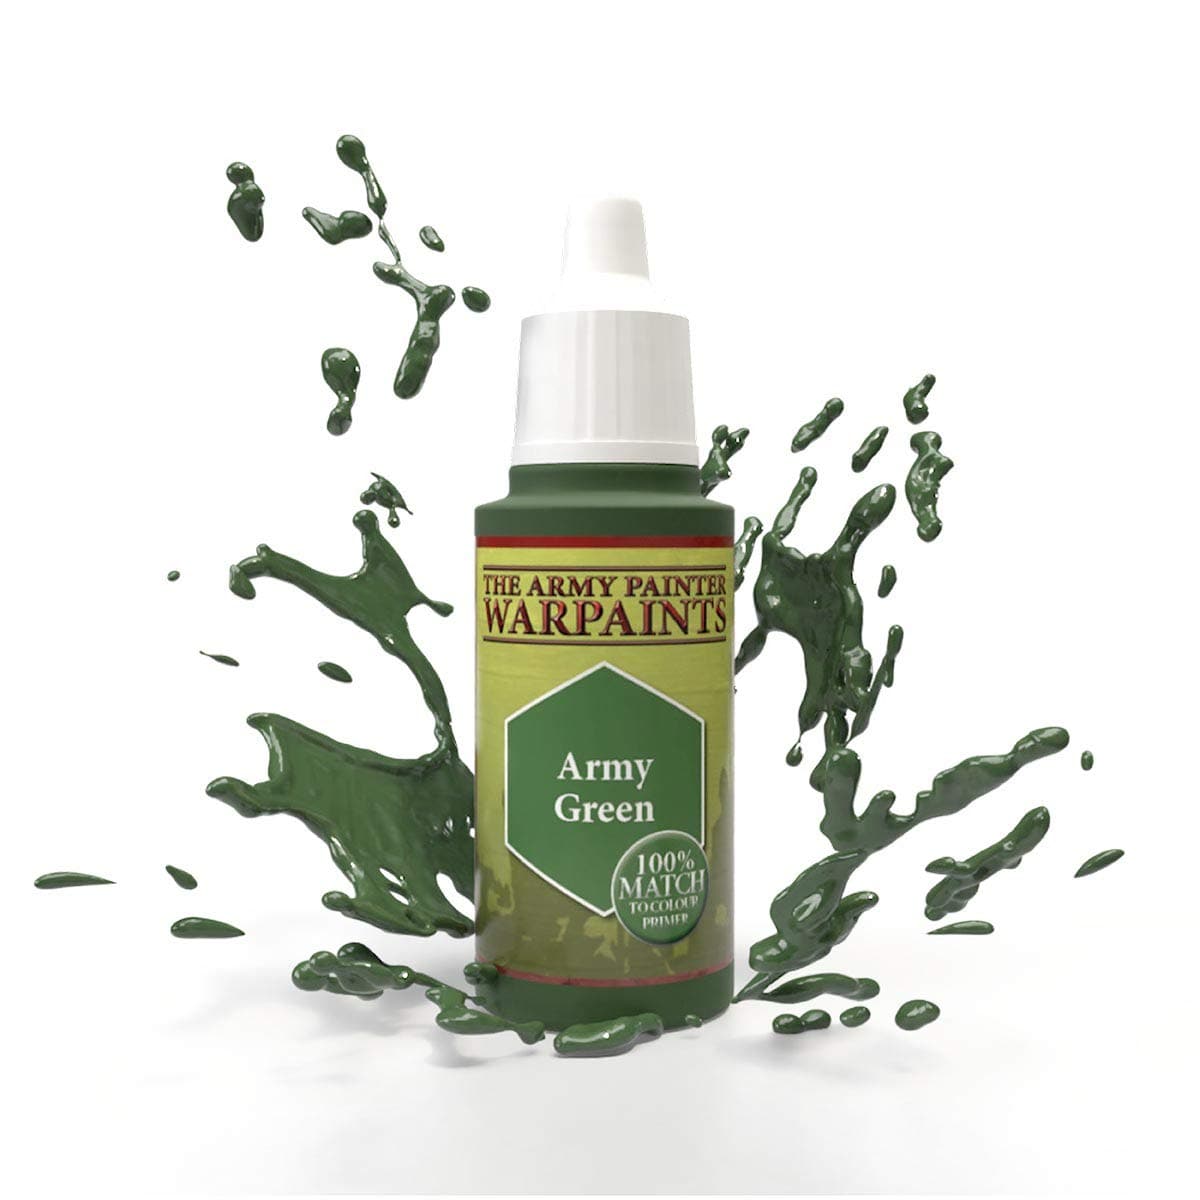 The Army Painter Accessories The Army Painter Warpaints: Army Green 18ml